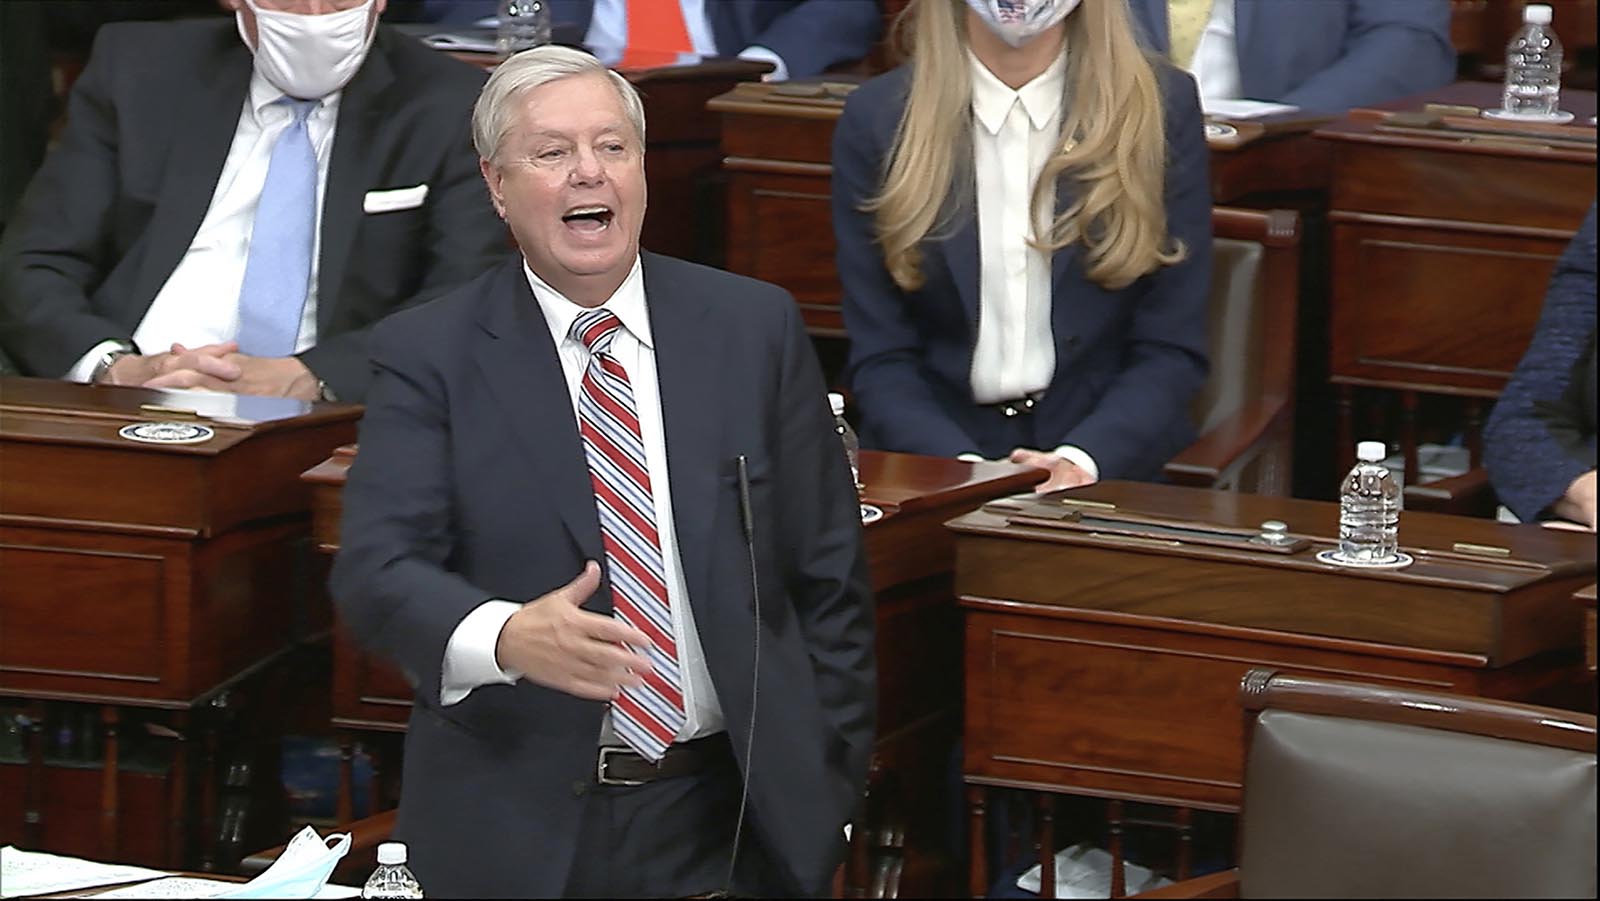 In this image from video, Sen. Lindsey Graham of South Carolina speaks as the Senate reconvenes to debate the objection to confirm the Electoral College Vote from Arizona, after protesters stormed into the U.S. Capitol on Wednesday, January 6. 